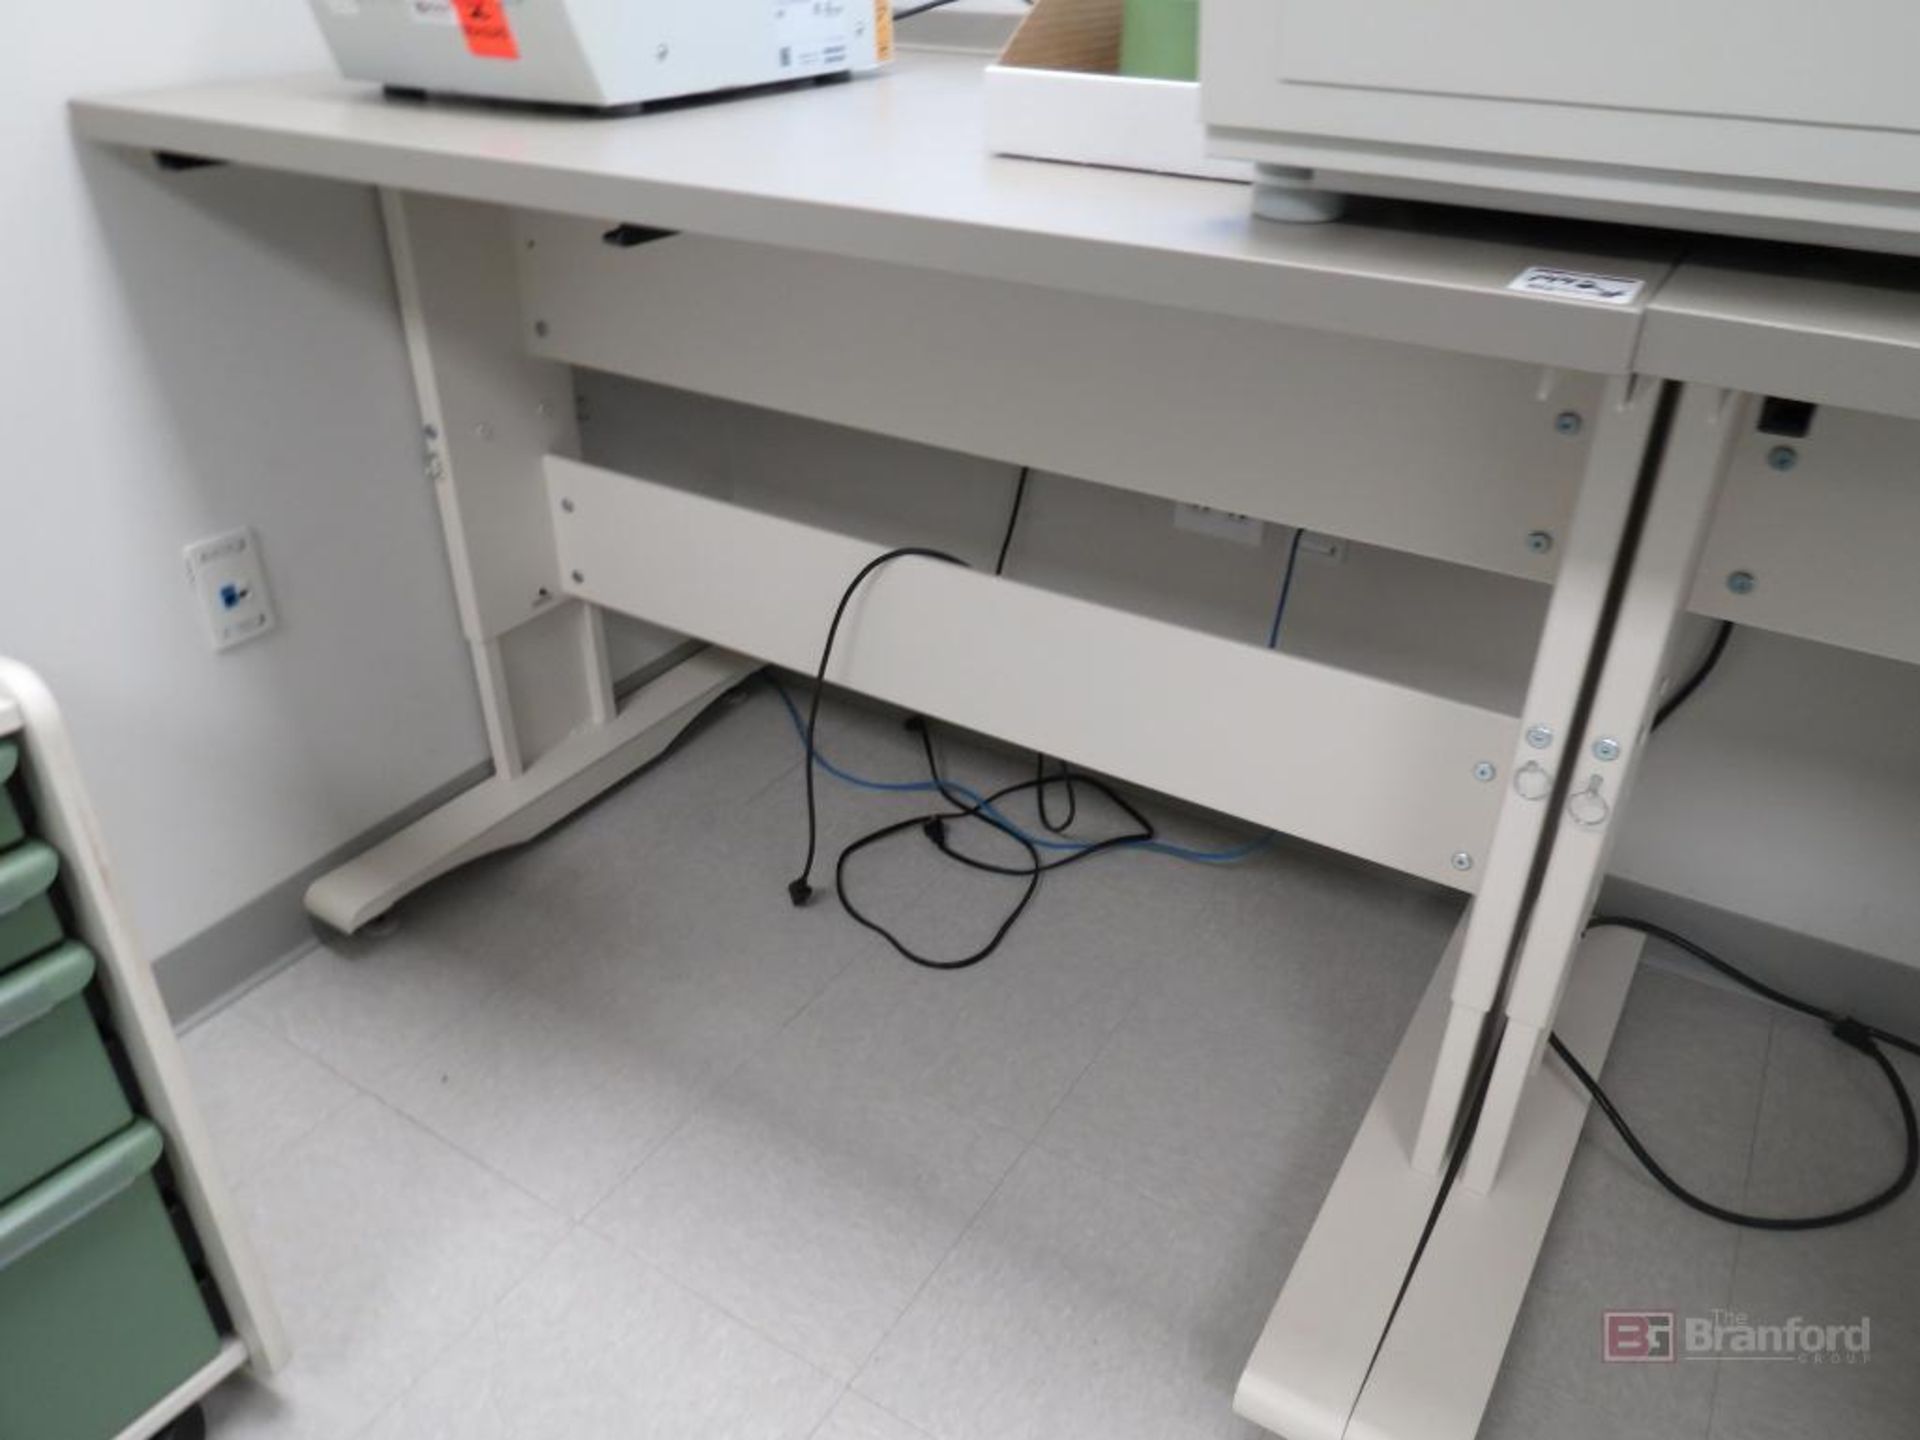 Lot of (3) Herman Miller for Healthcare Lab/Medical Benches - Image 4 of 5